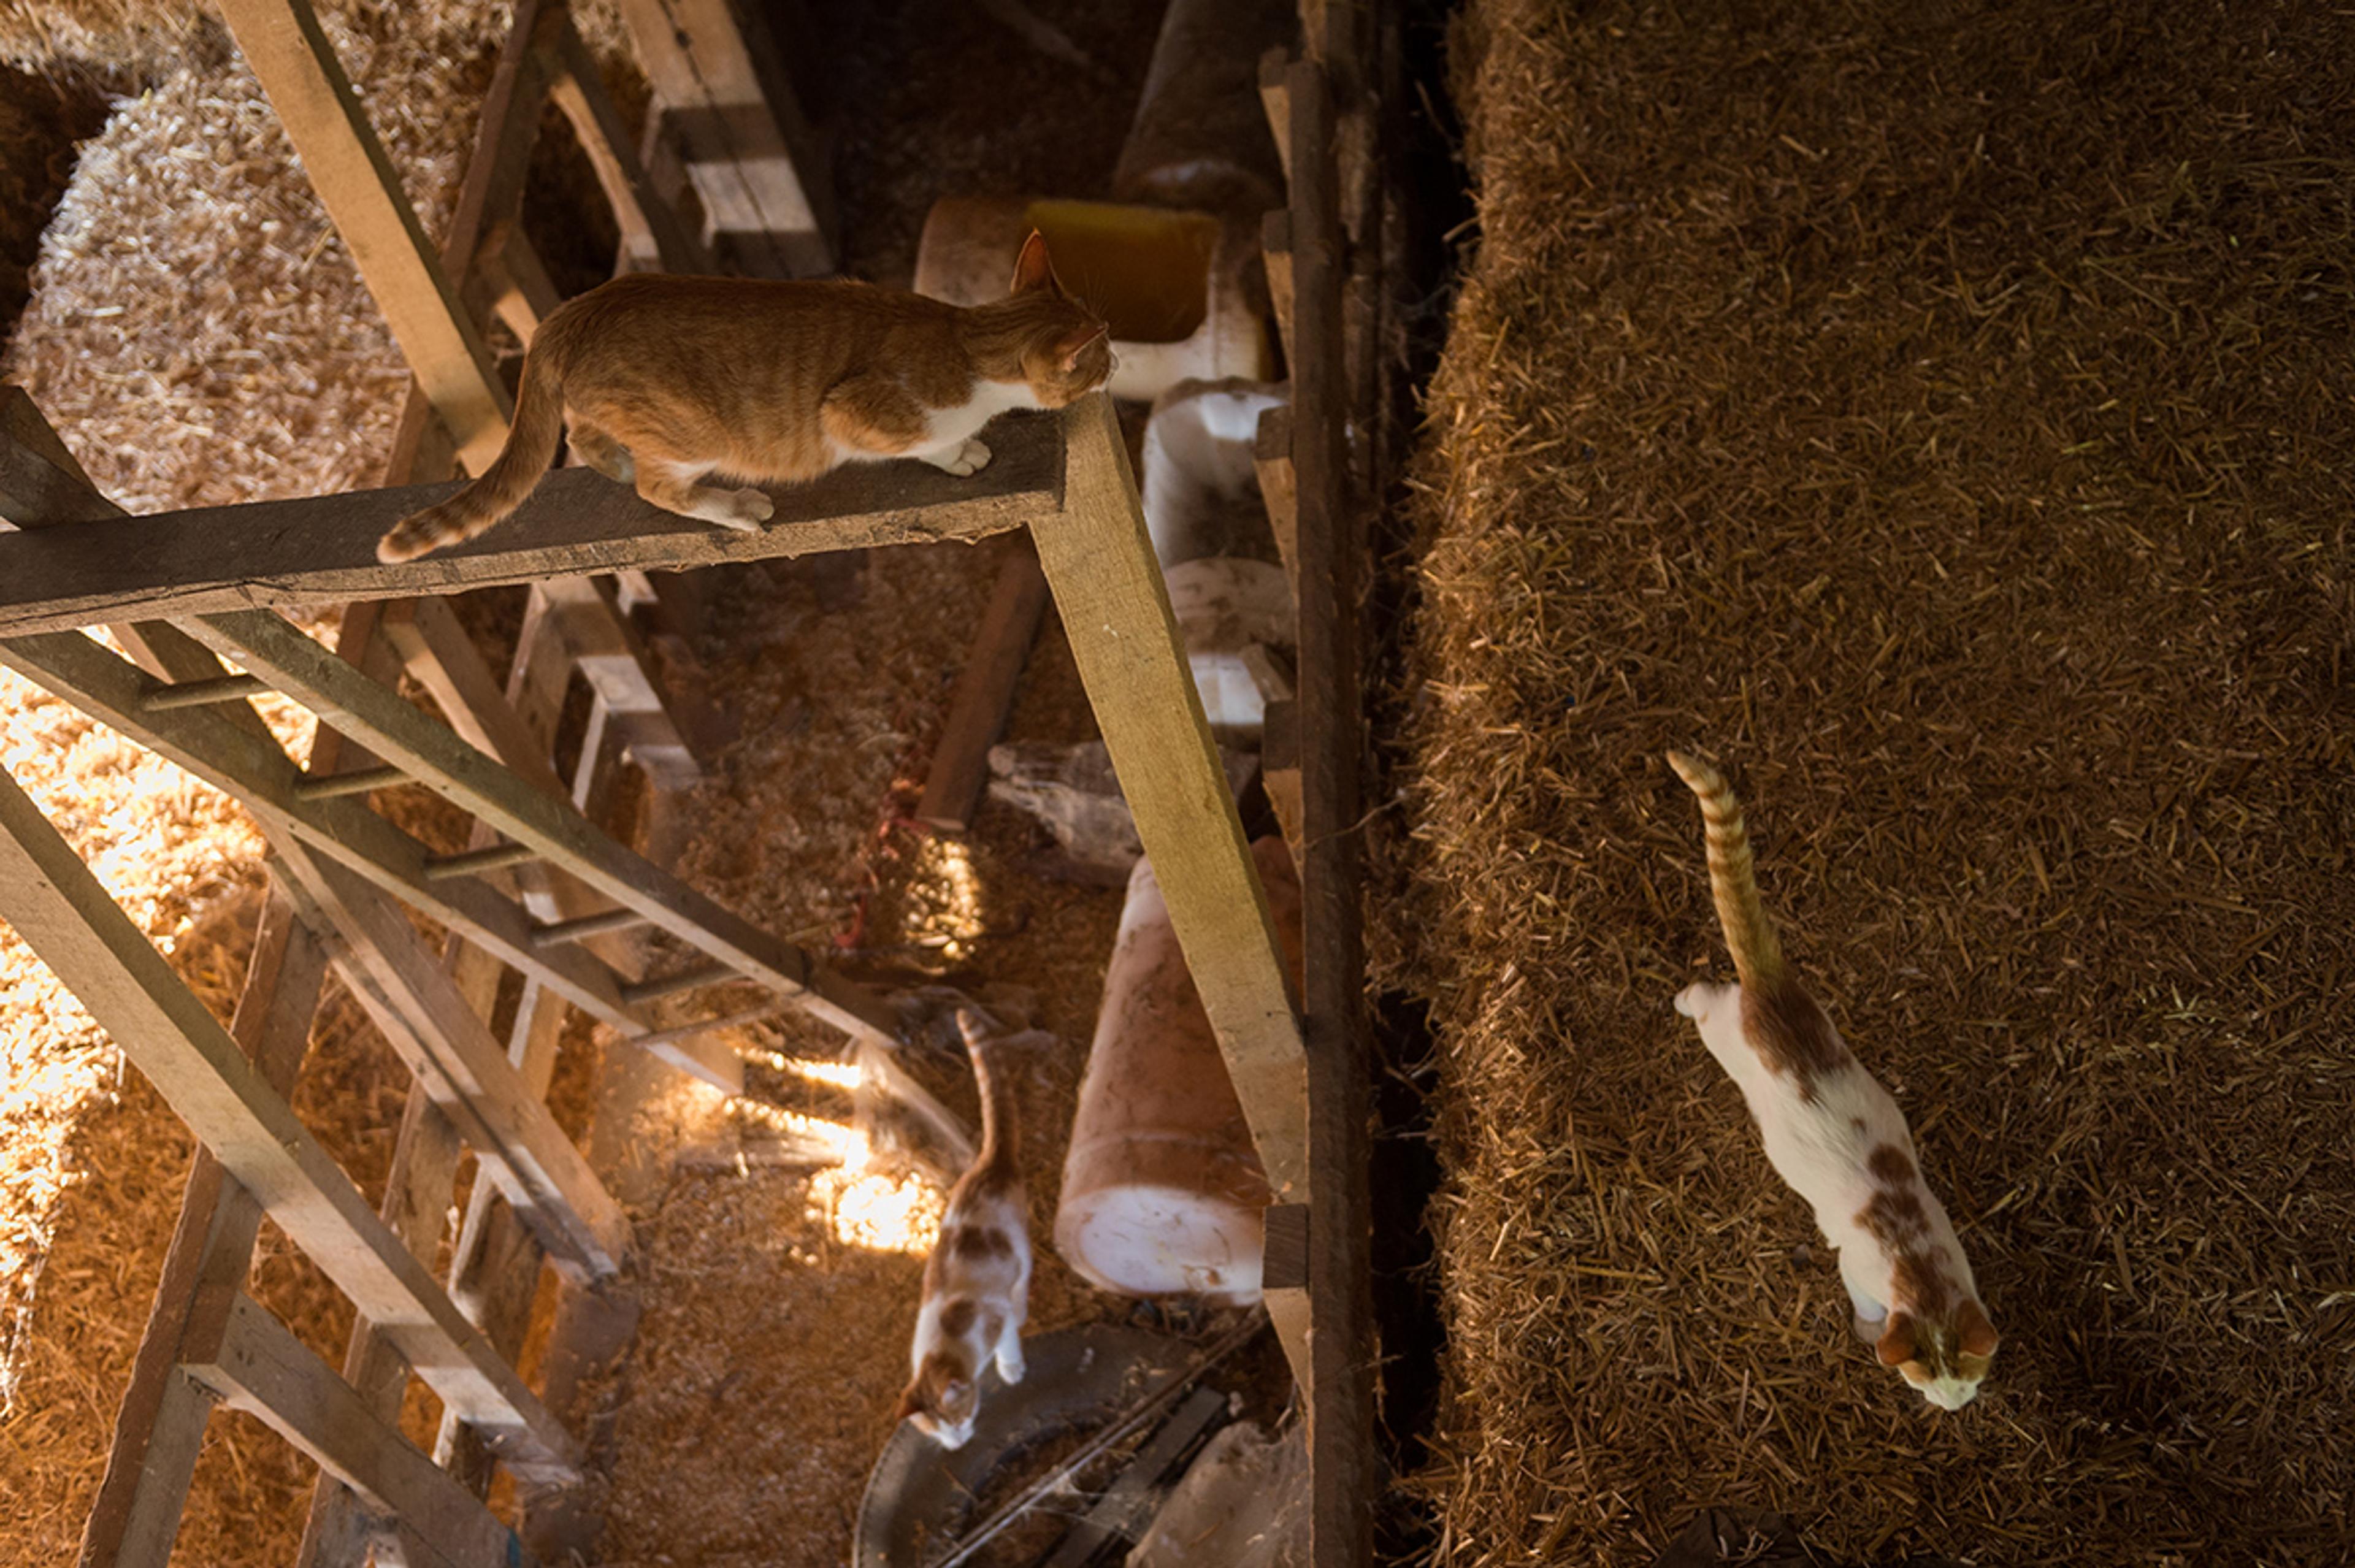 An overhead view of three cats playing in the haymow of a barn.